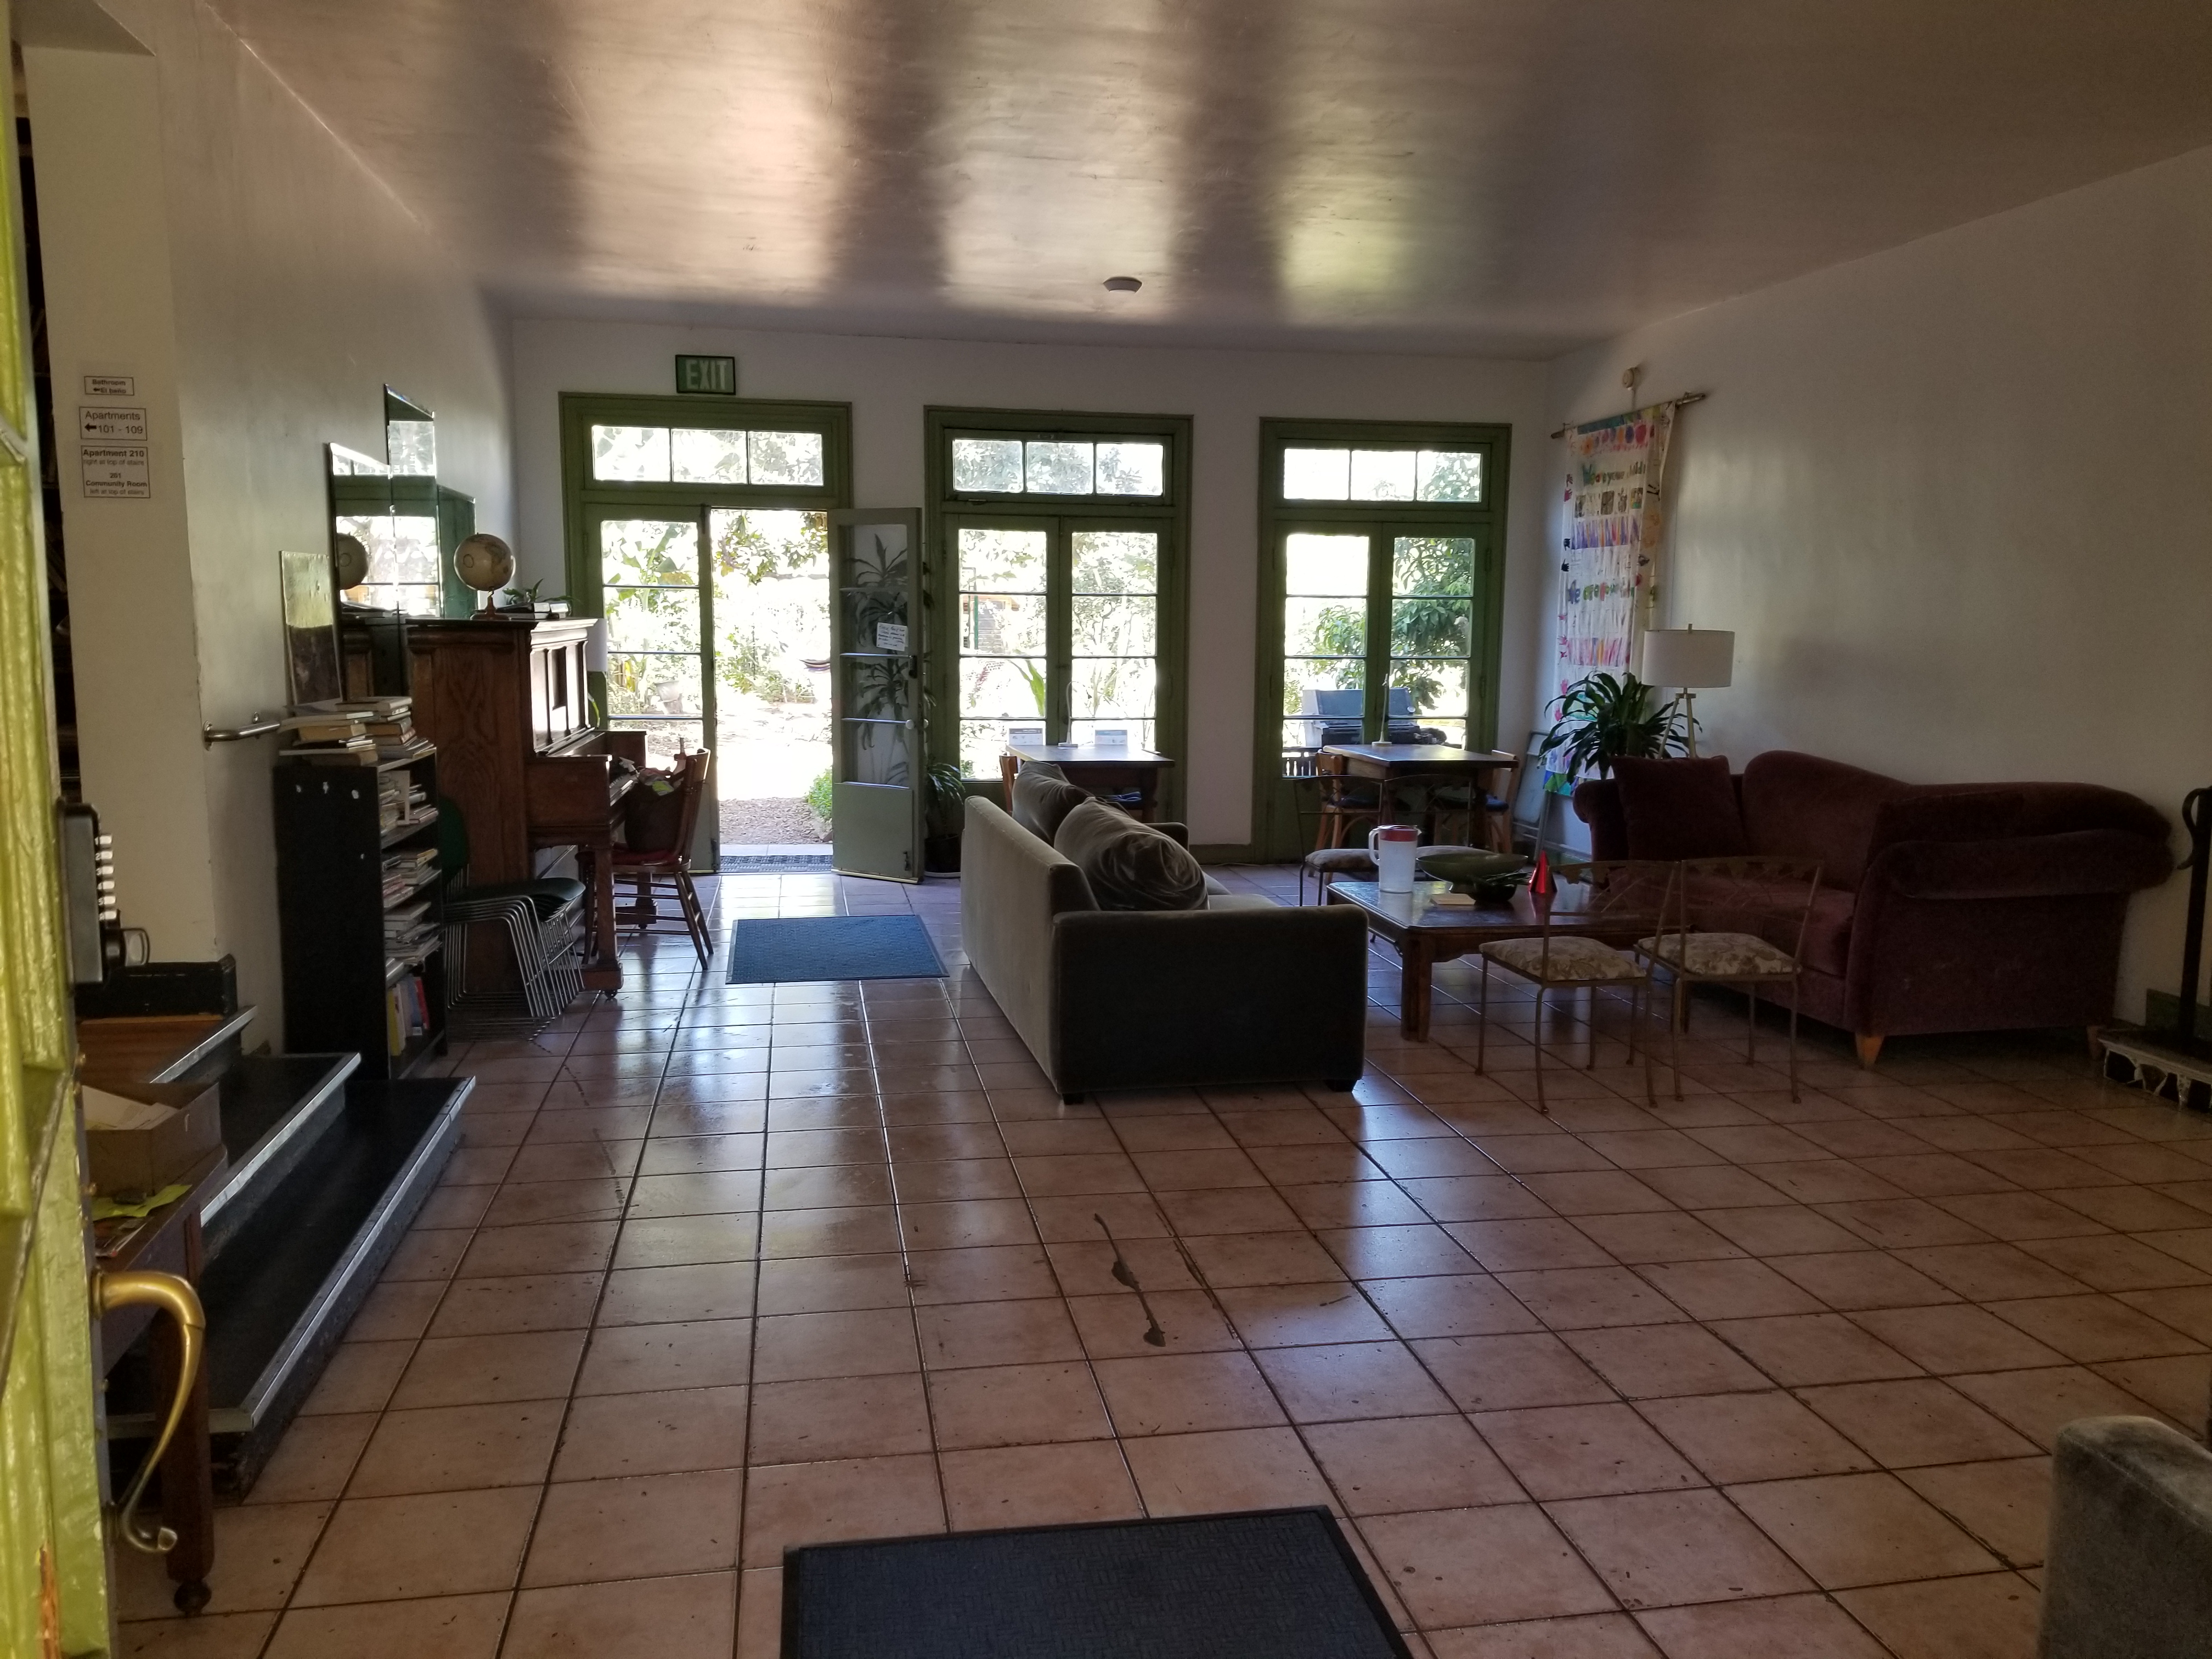 Interior view of the lobby/common area of Ecovillage with couches and coffee table